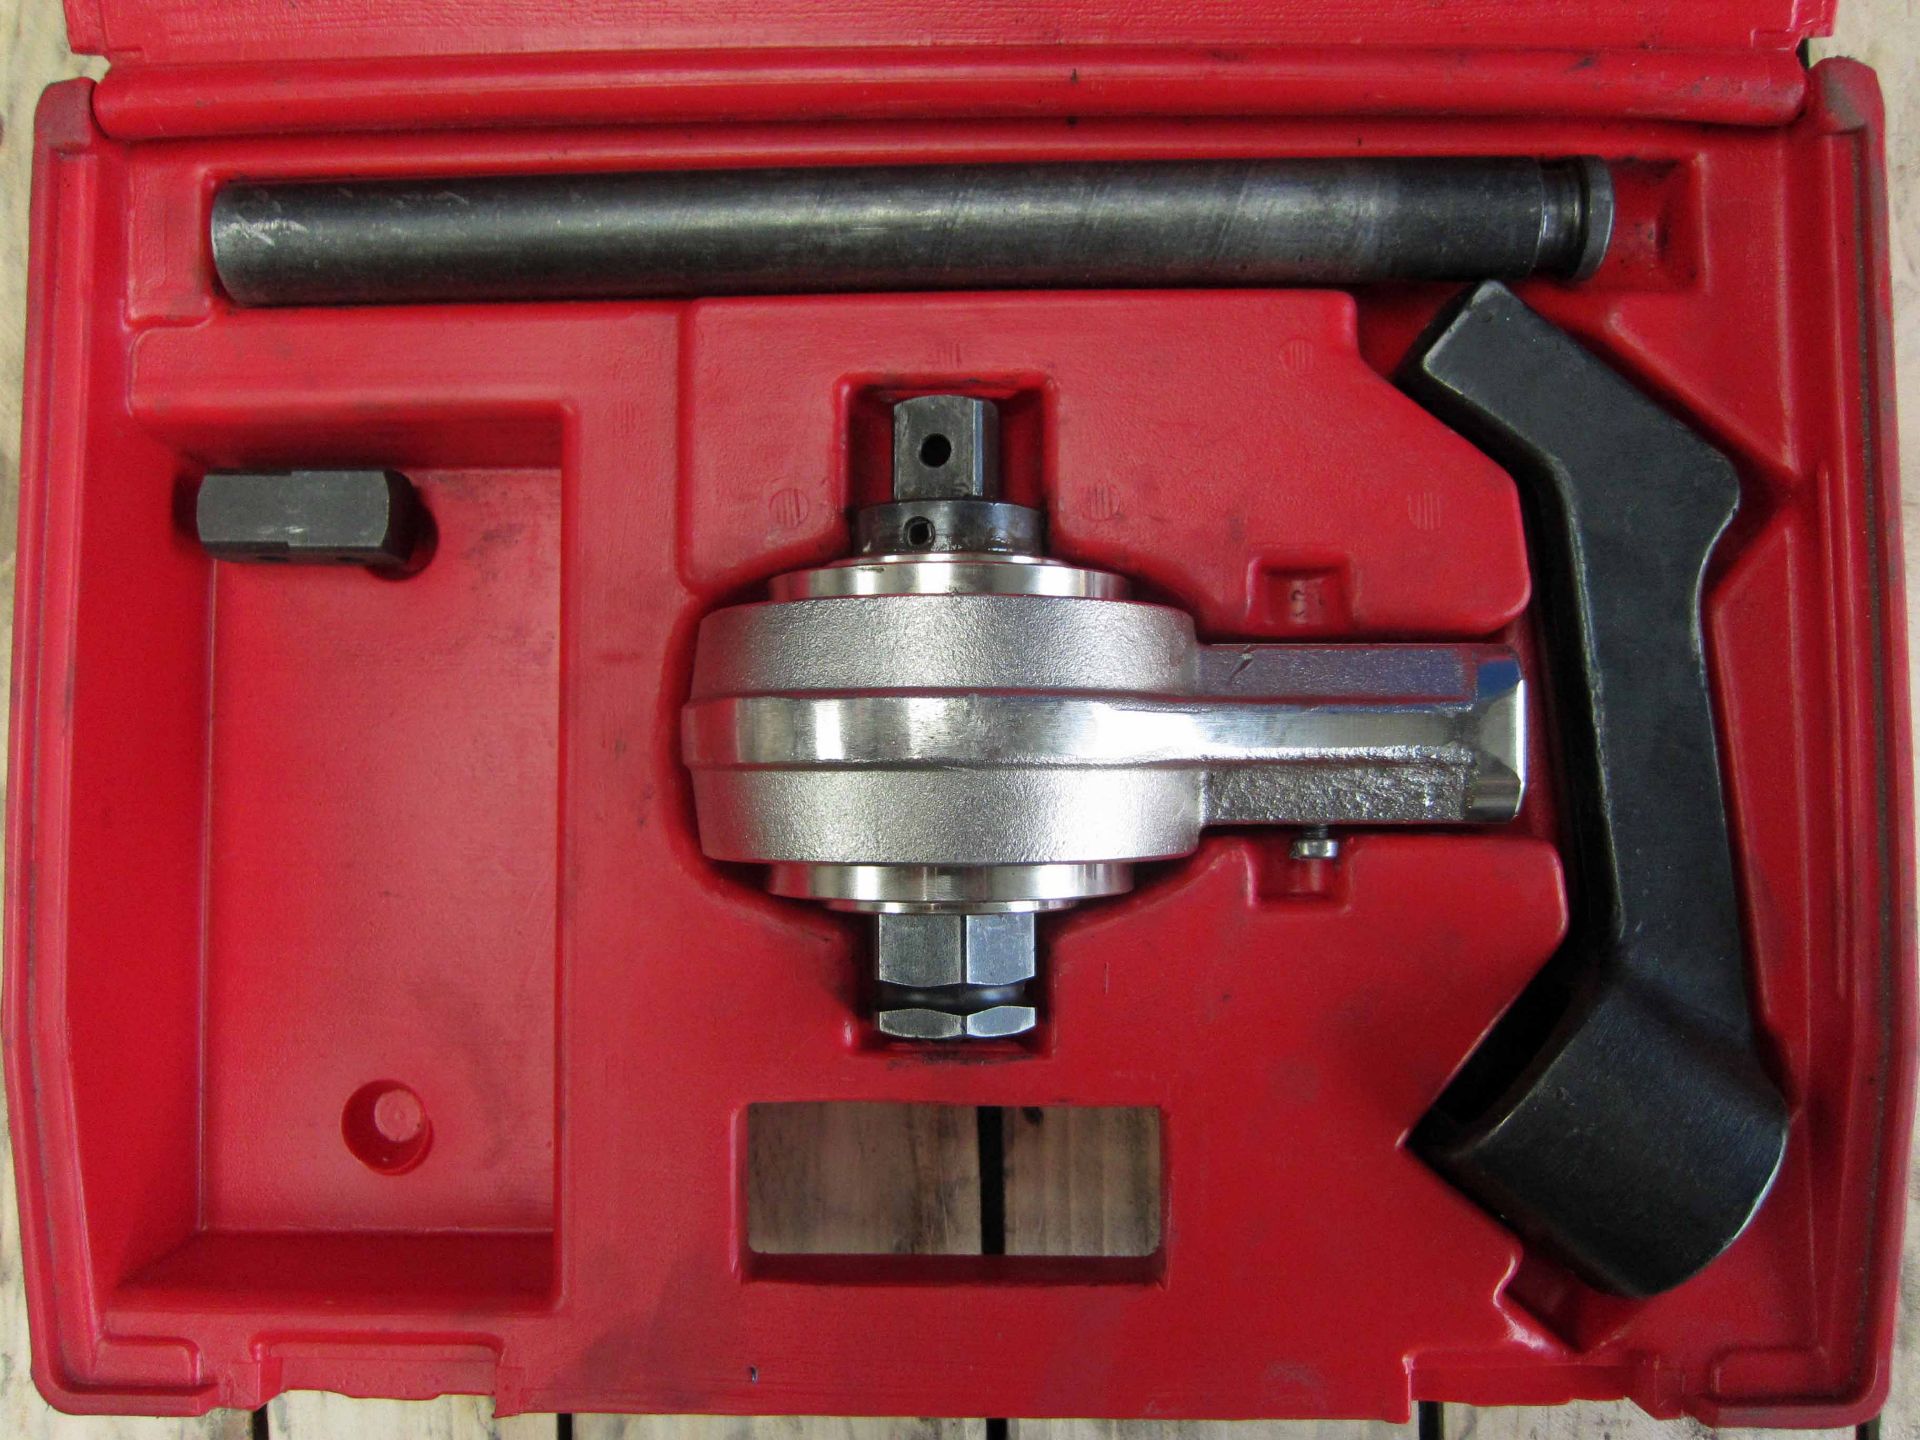 A NORBAR Model Highway Man 1300NM Torque Multiplier, 5:1 Multiplication, 3/4 Inch x 1/2 Inch - - Image 3 of 4